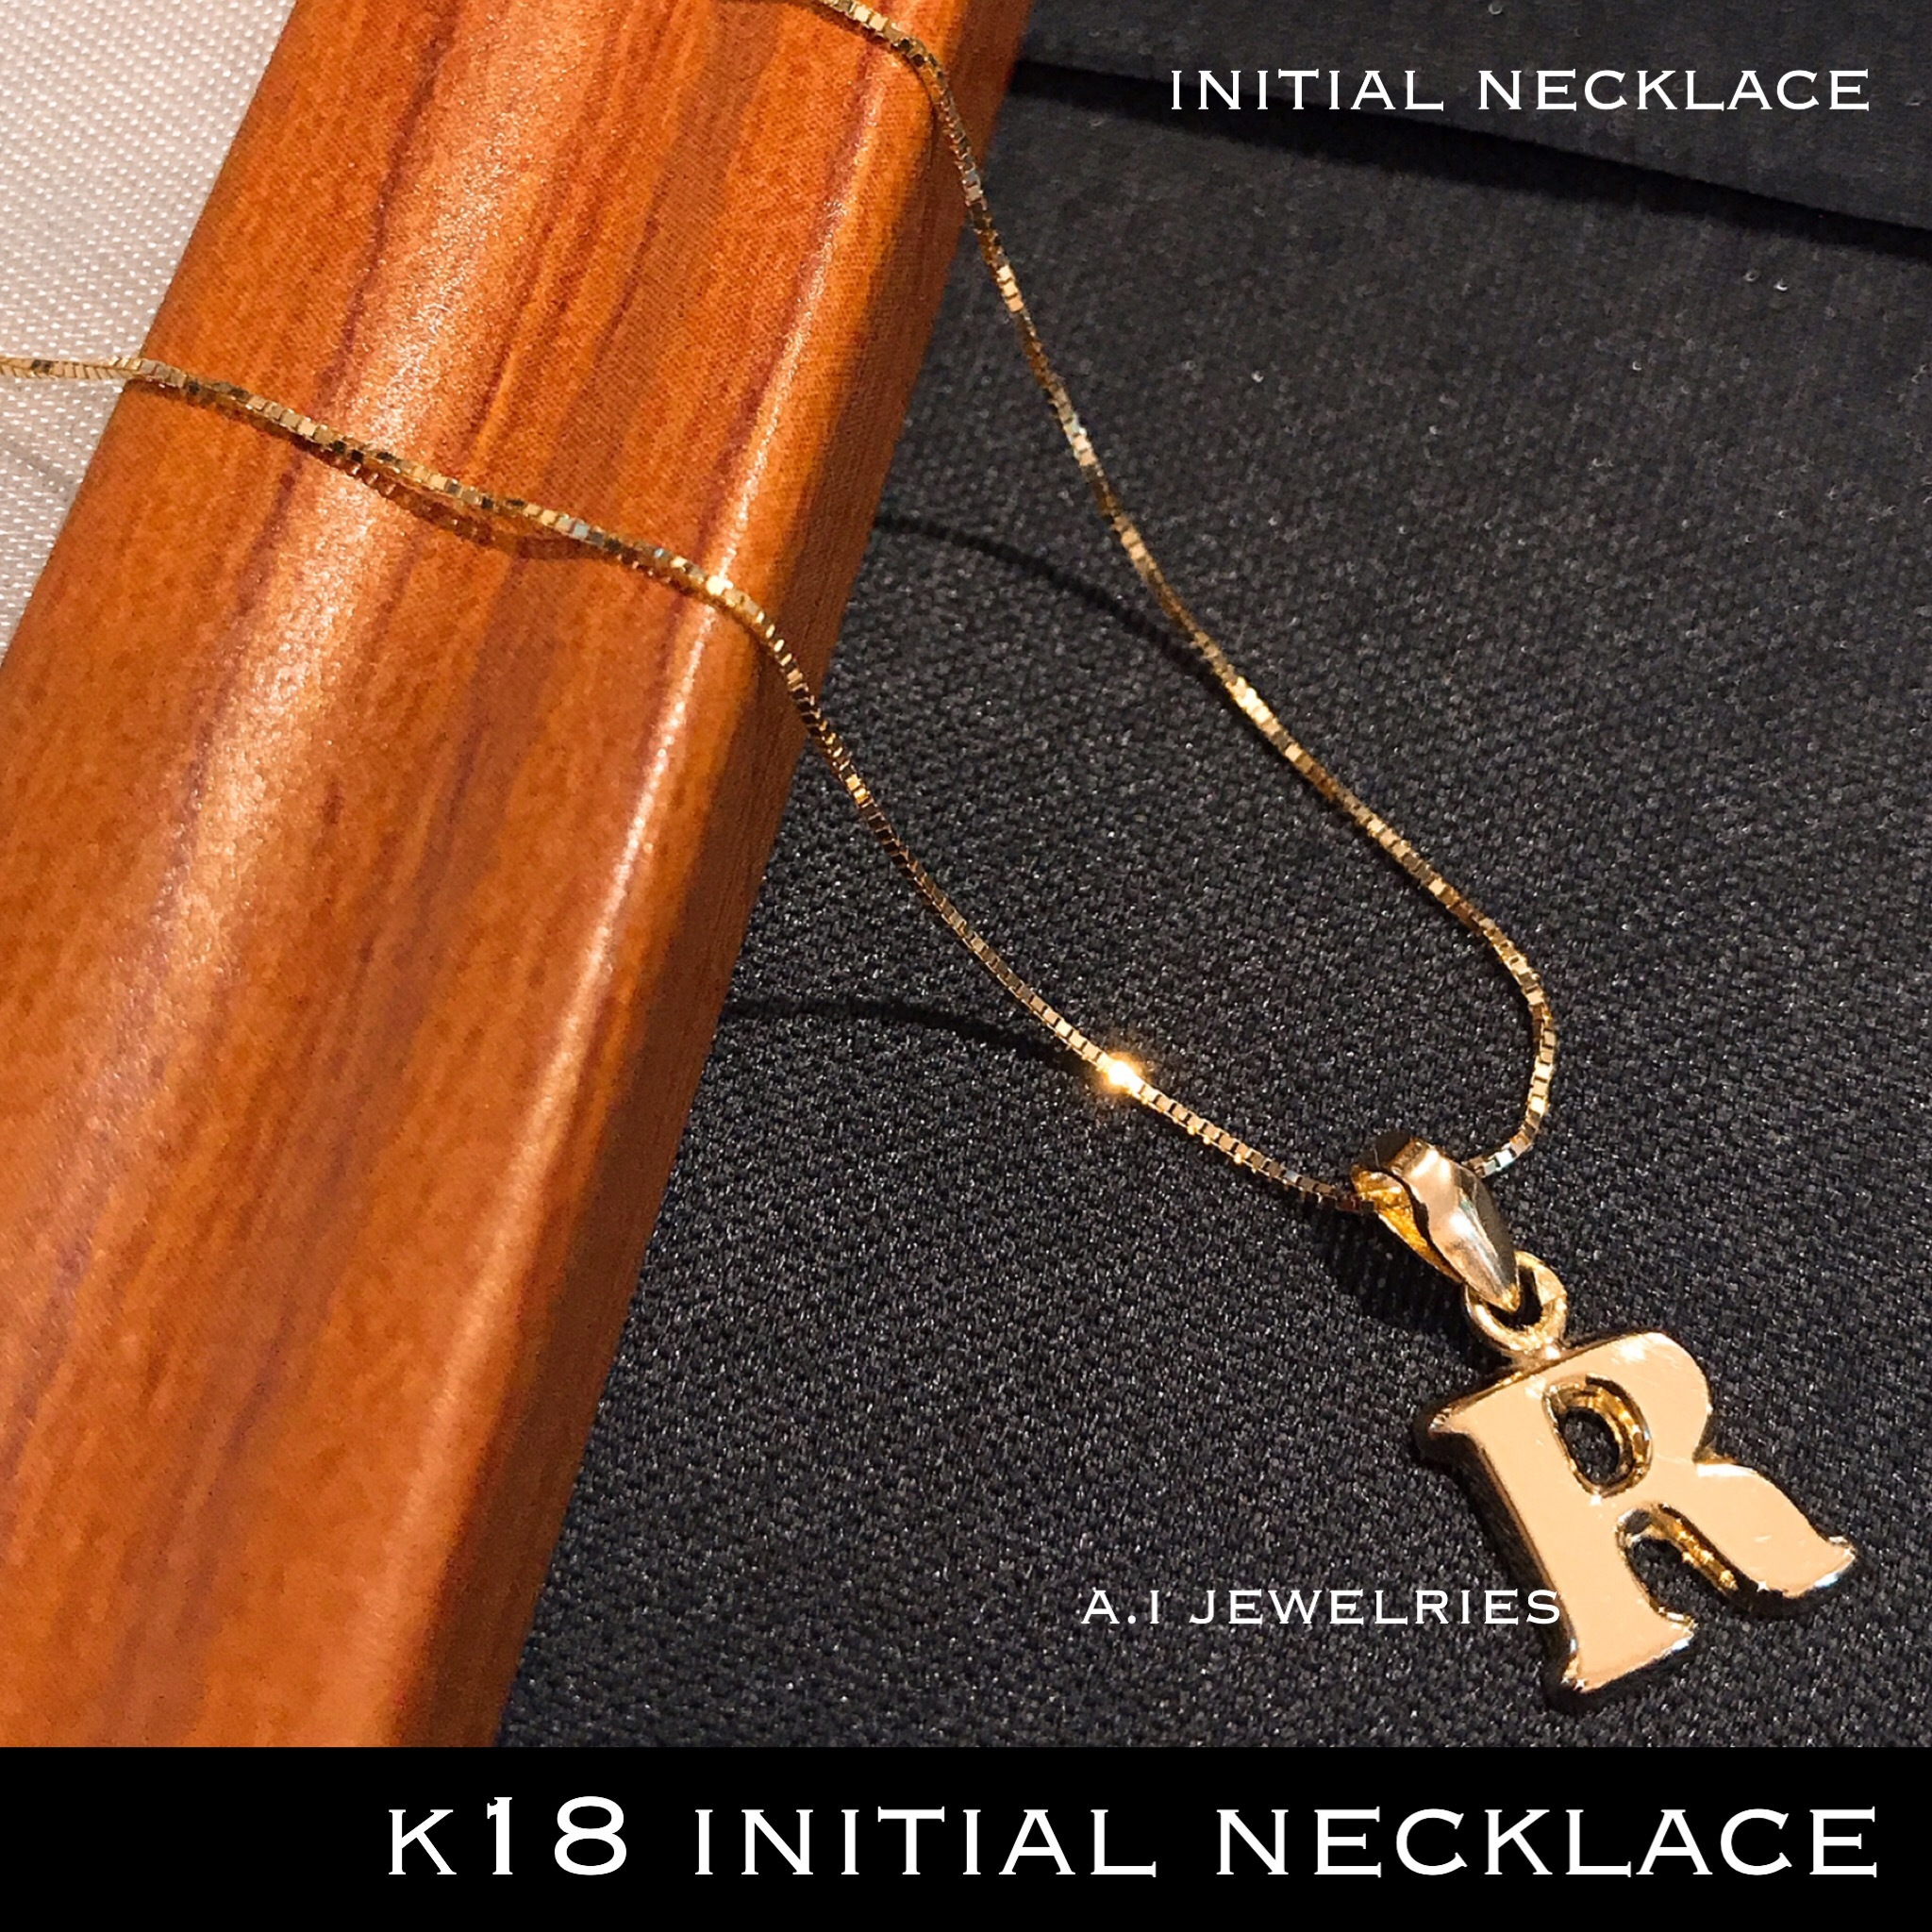 k18 18金 イニシャル ネックレス 40cm / k18 initial necklace 40cm | A.I JEWELRIES